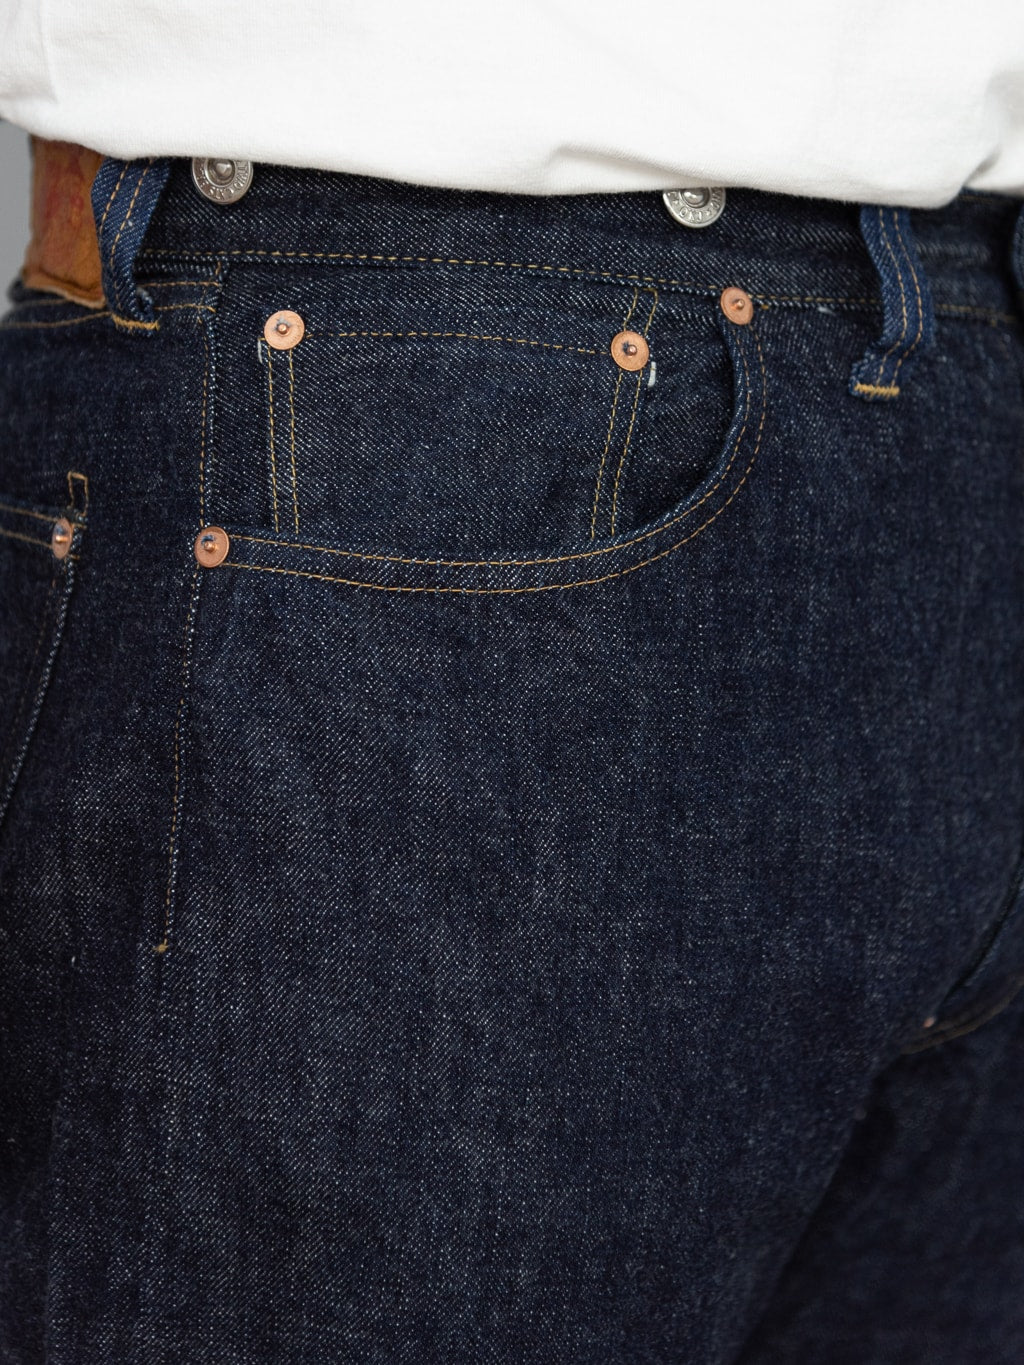 TCB 20s indigo Jeans one wash coin pocket